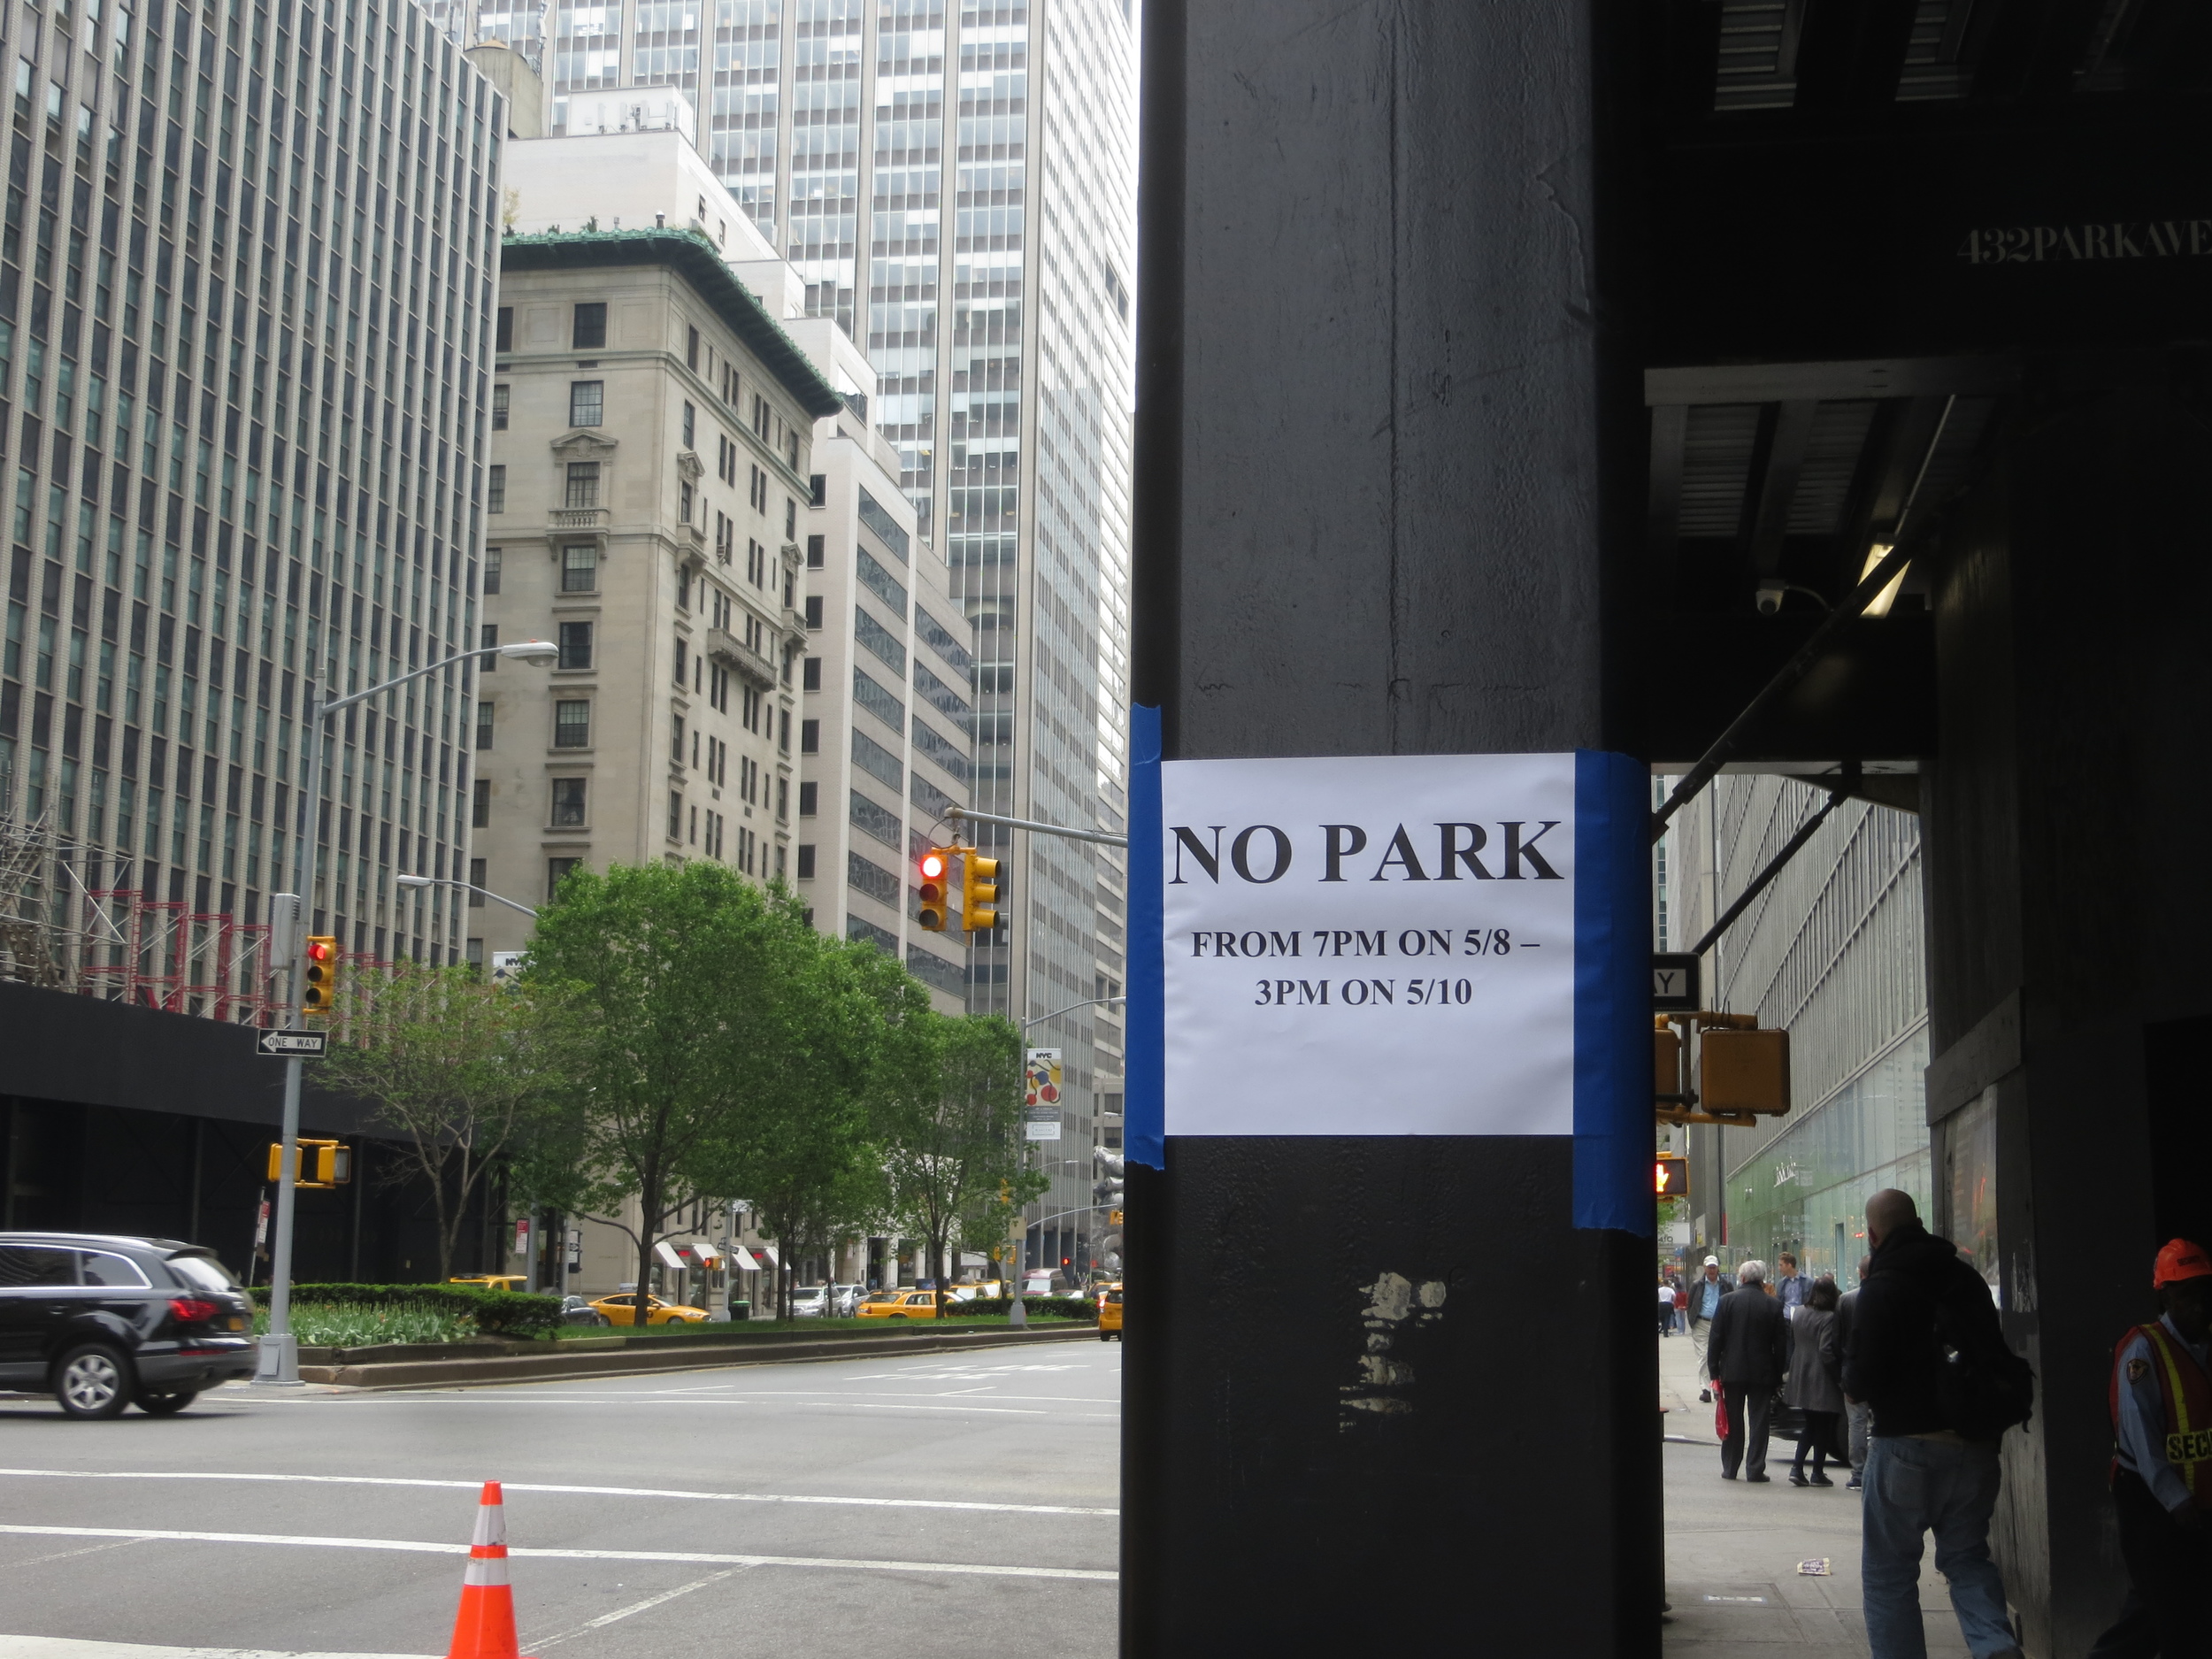 Park Avenue will not be available next week